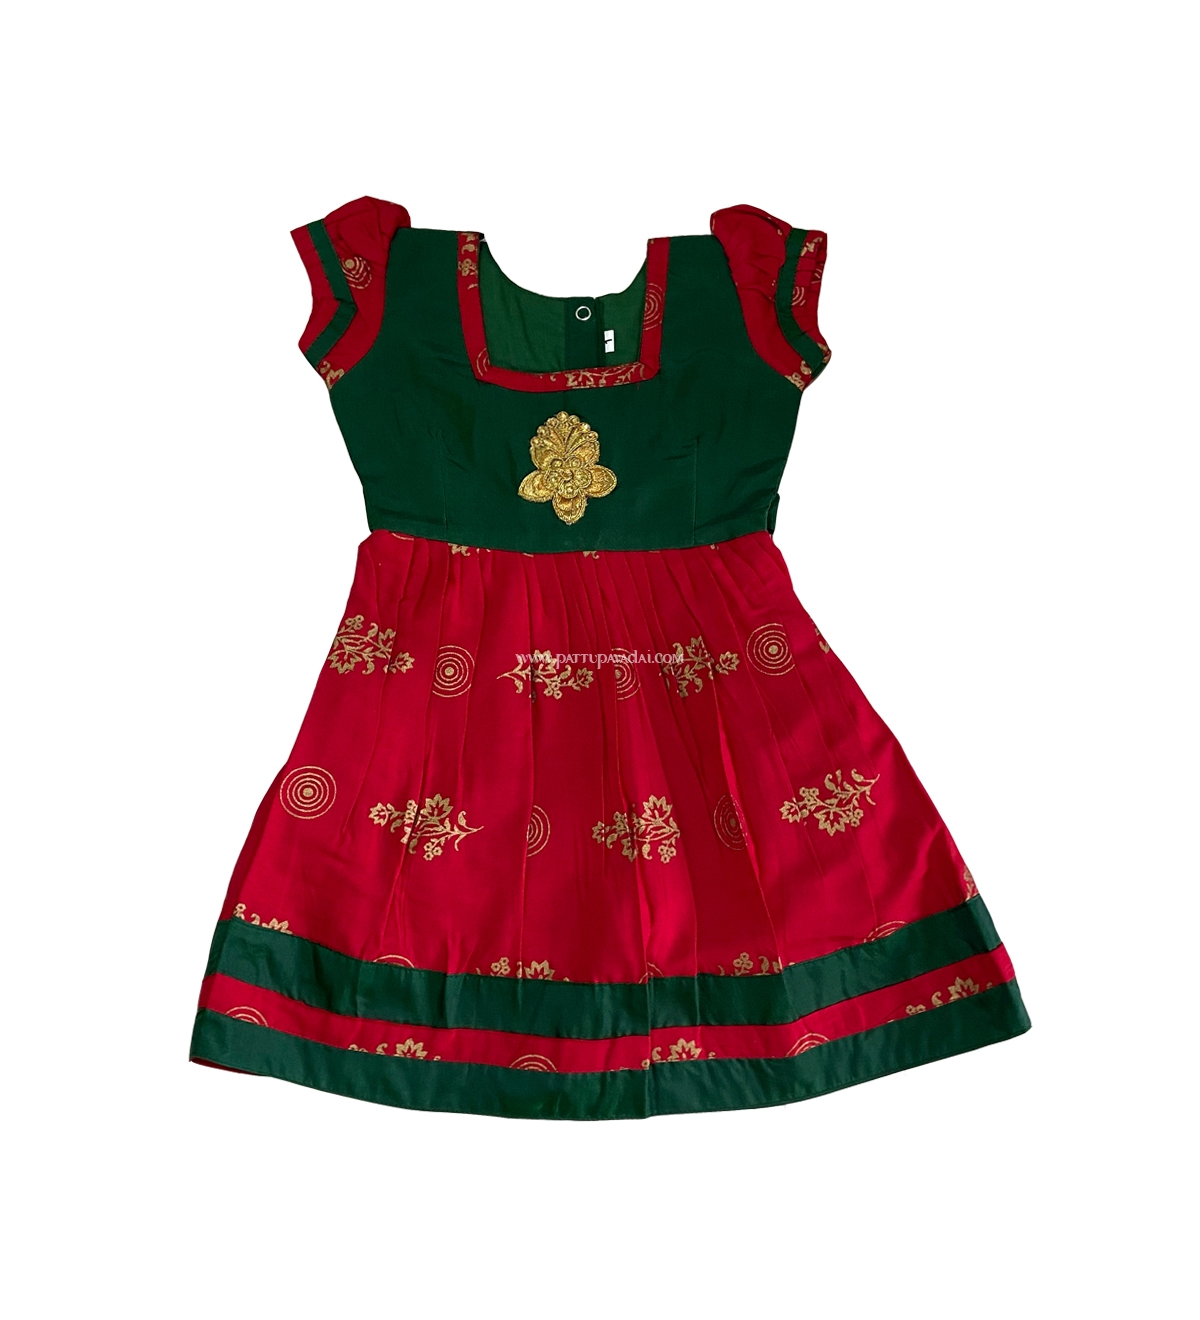 Cotton frock green and red